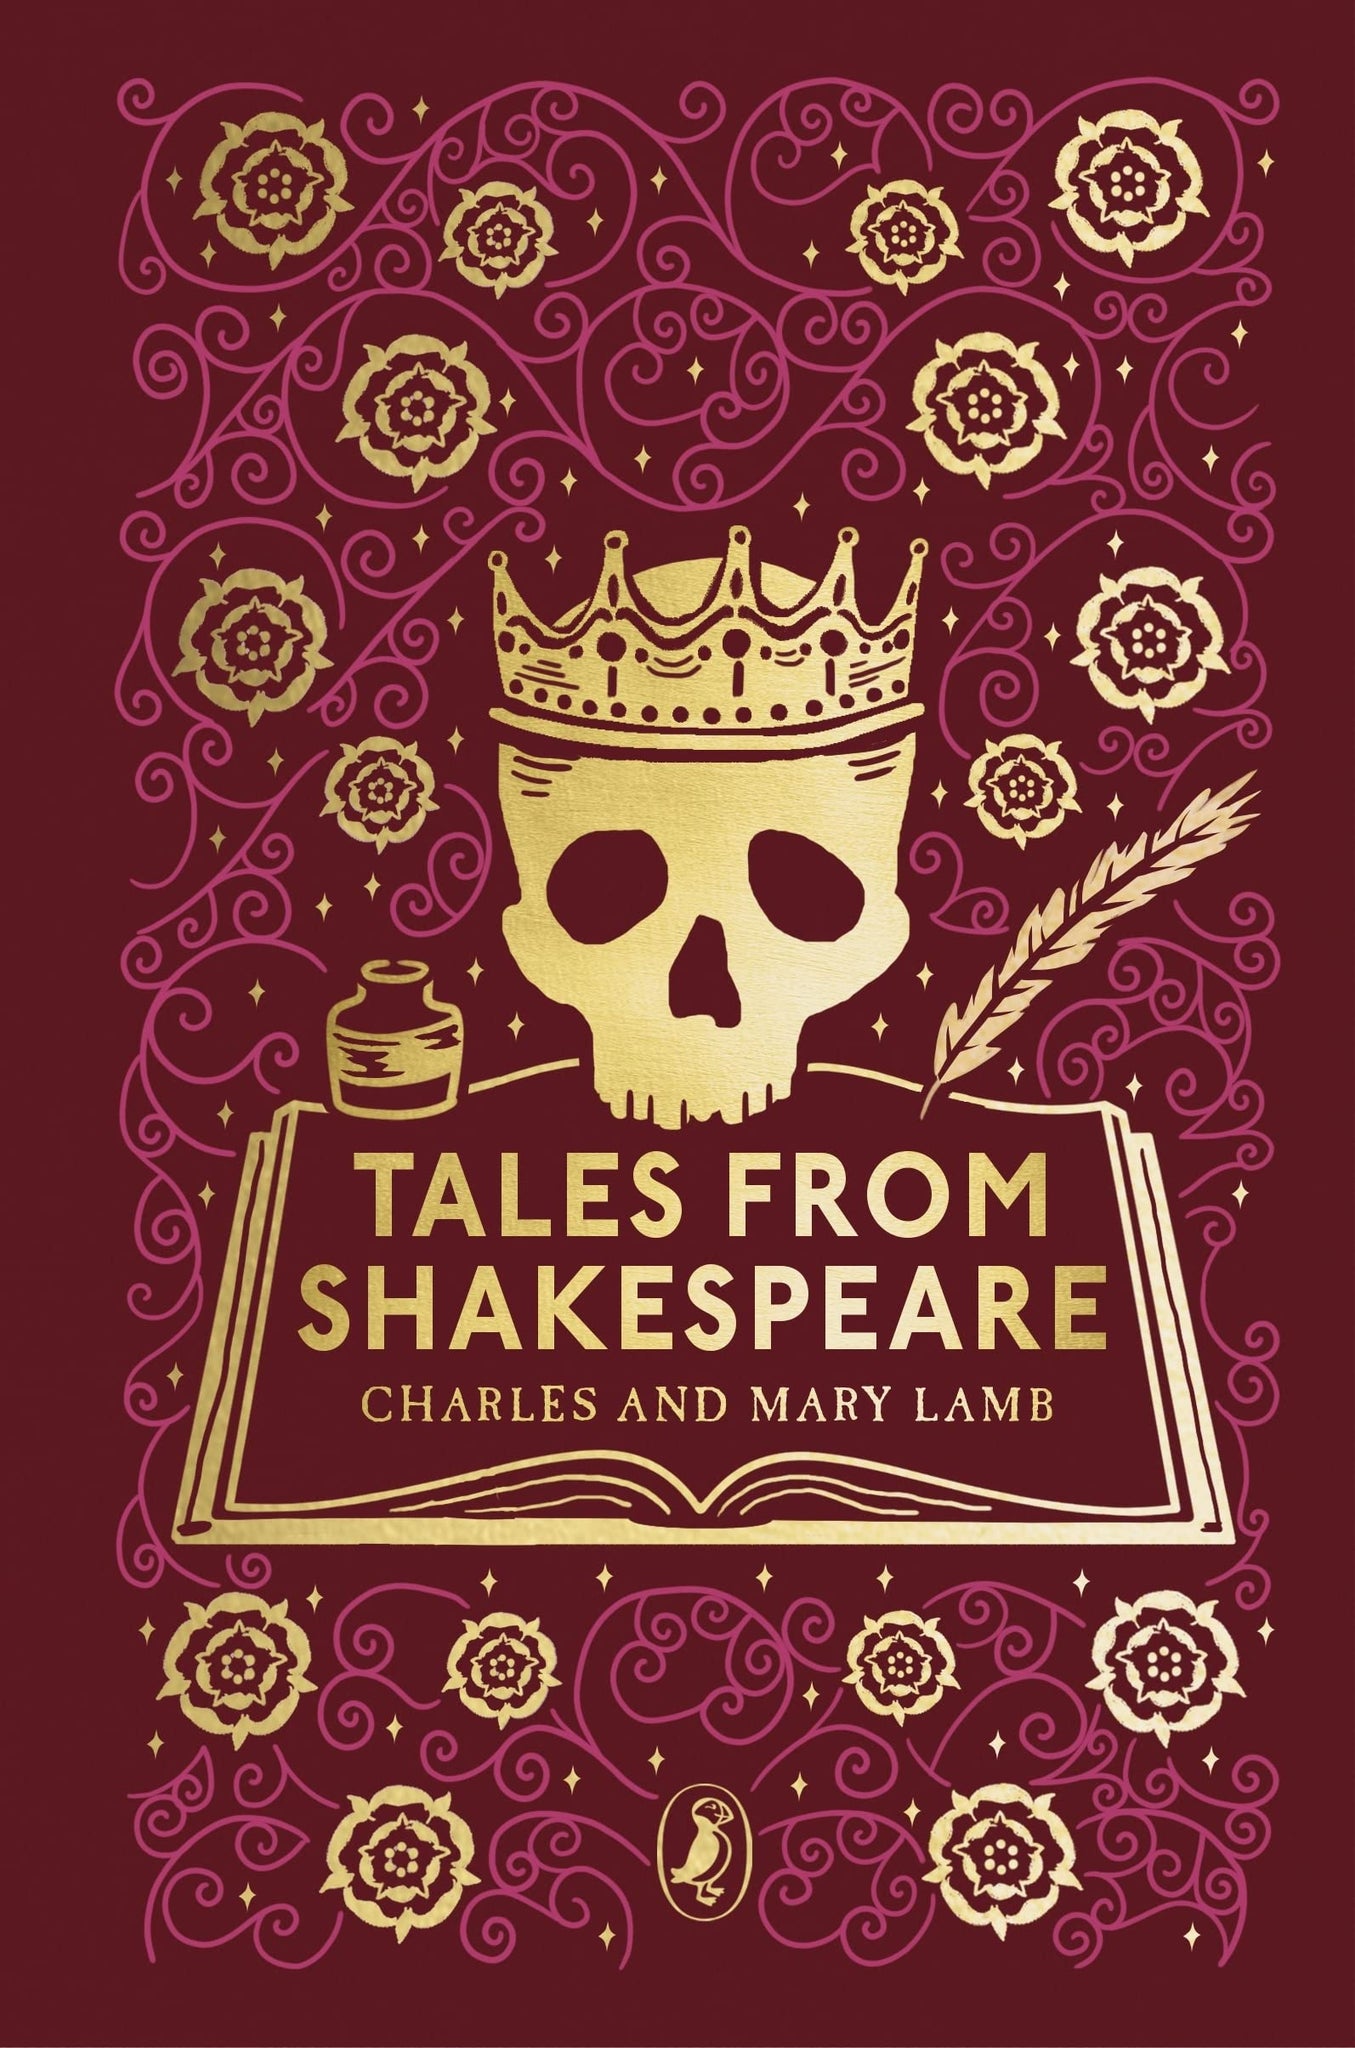 Tales from Shakespeare (Puffin Clothbound Classics)